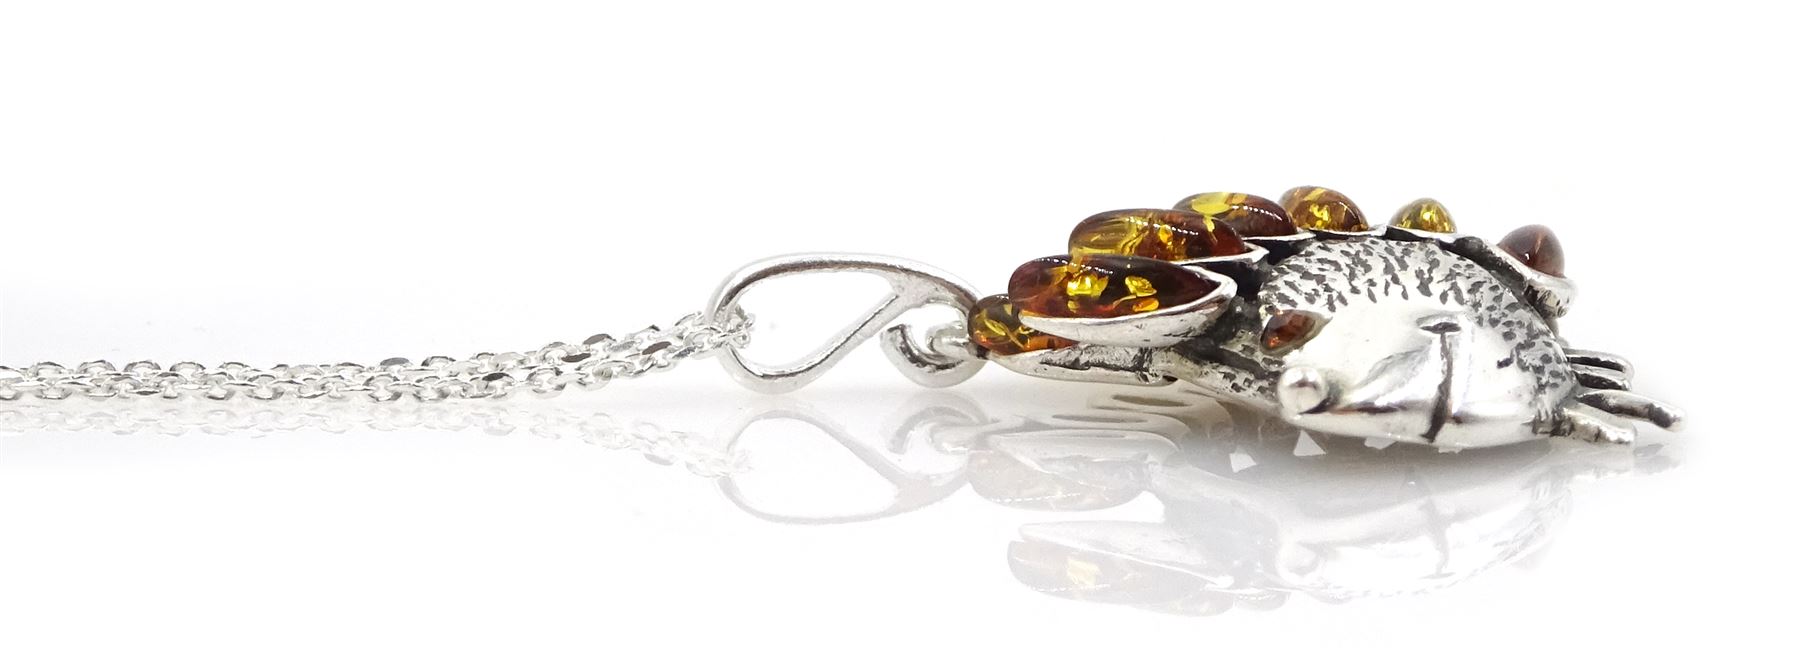 Silver Baltic amber hedgehog pendant necklace - Image 2 of 2